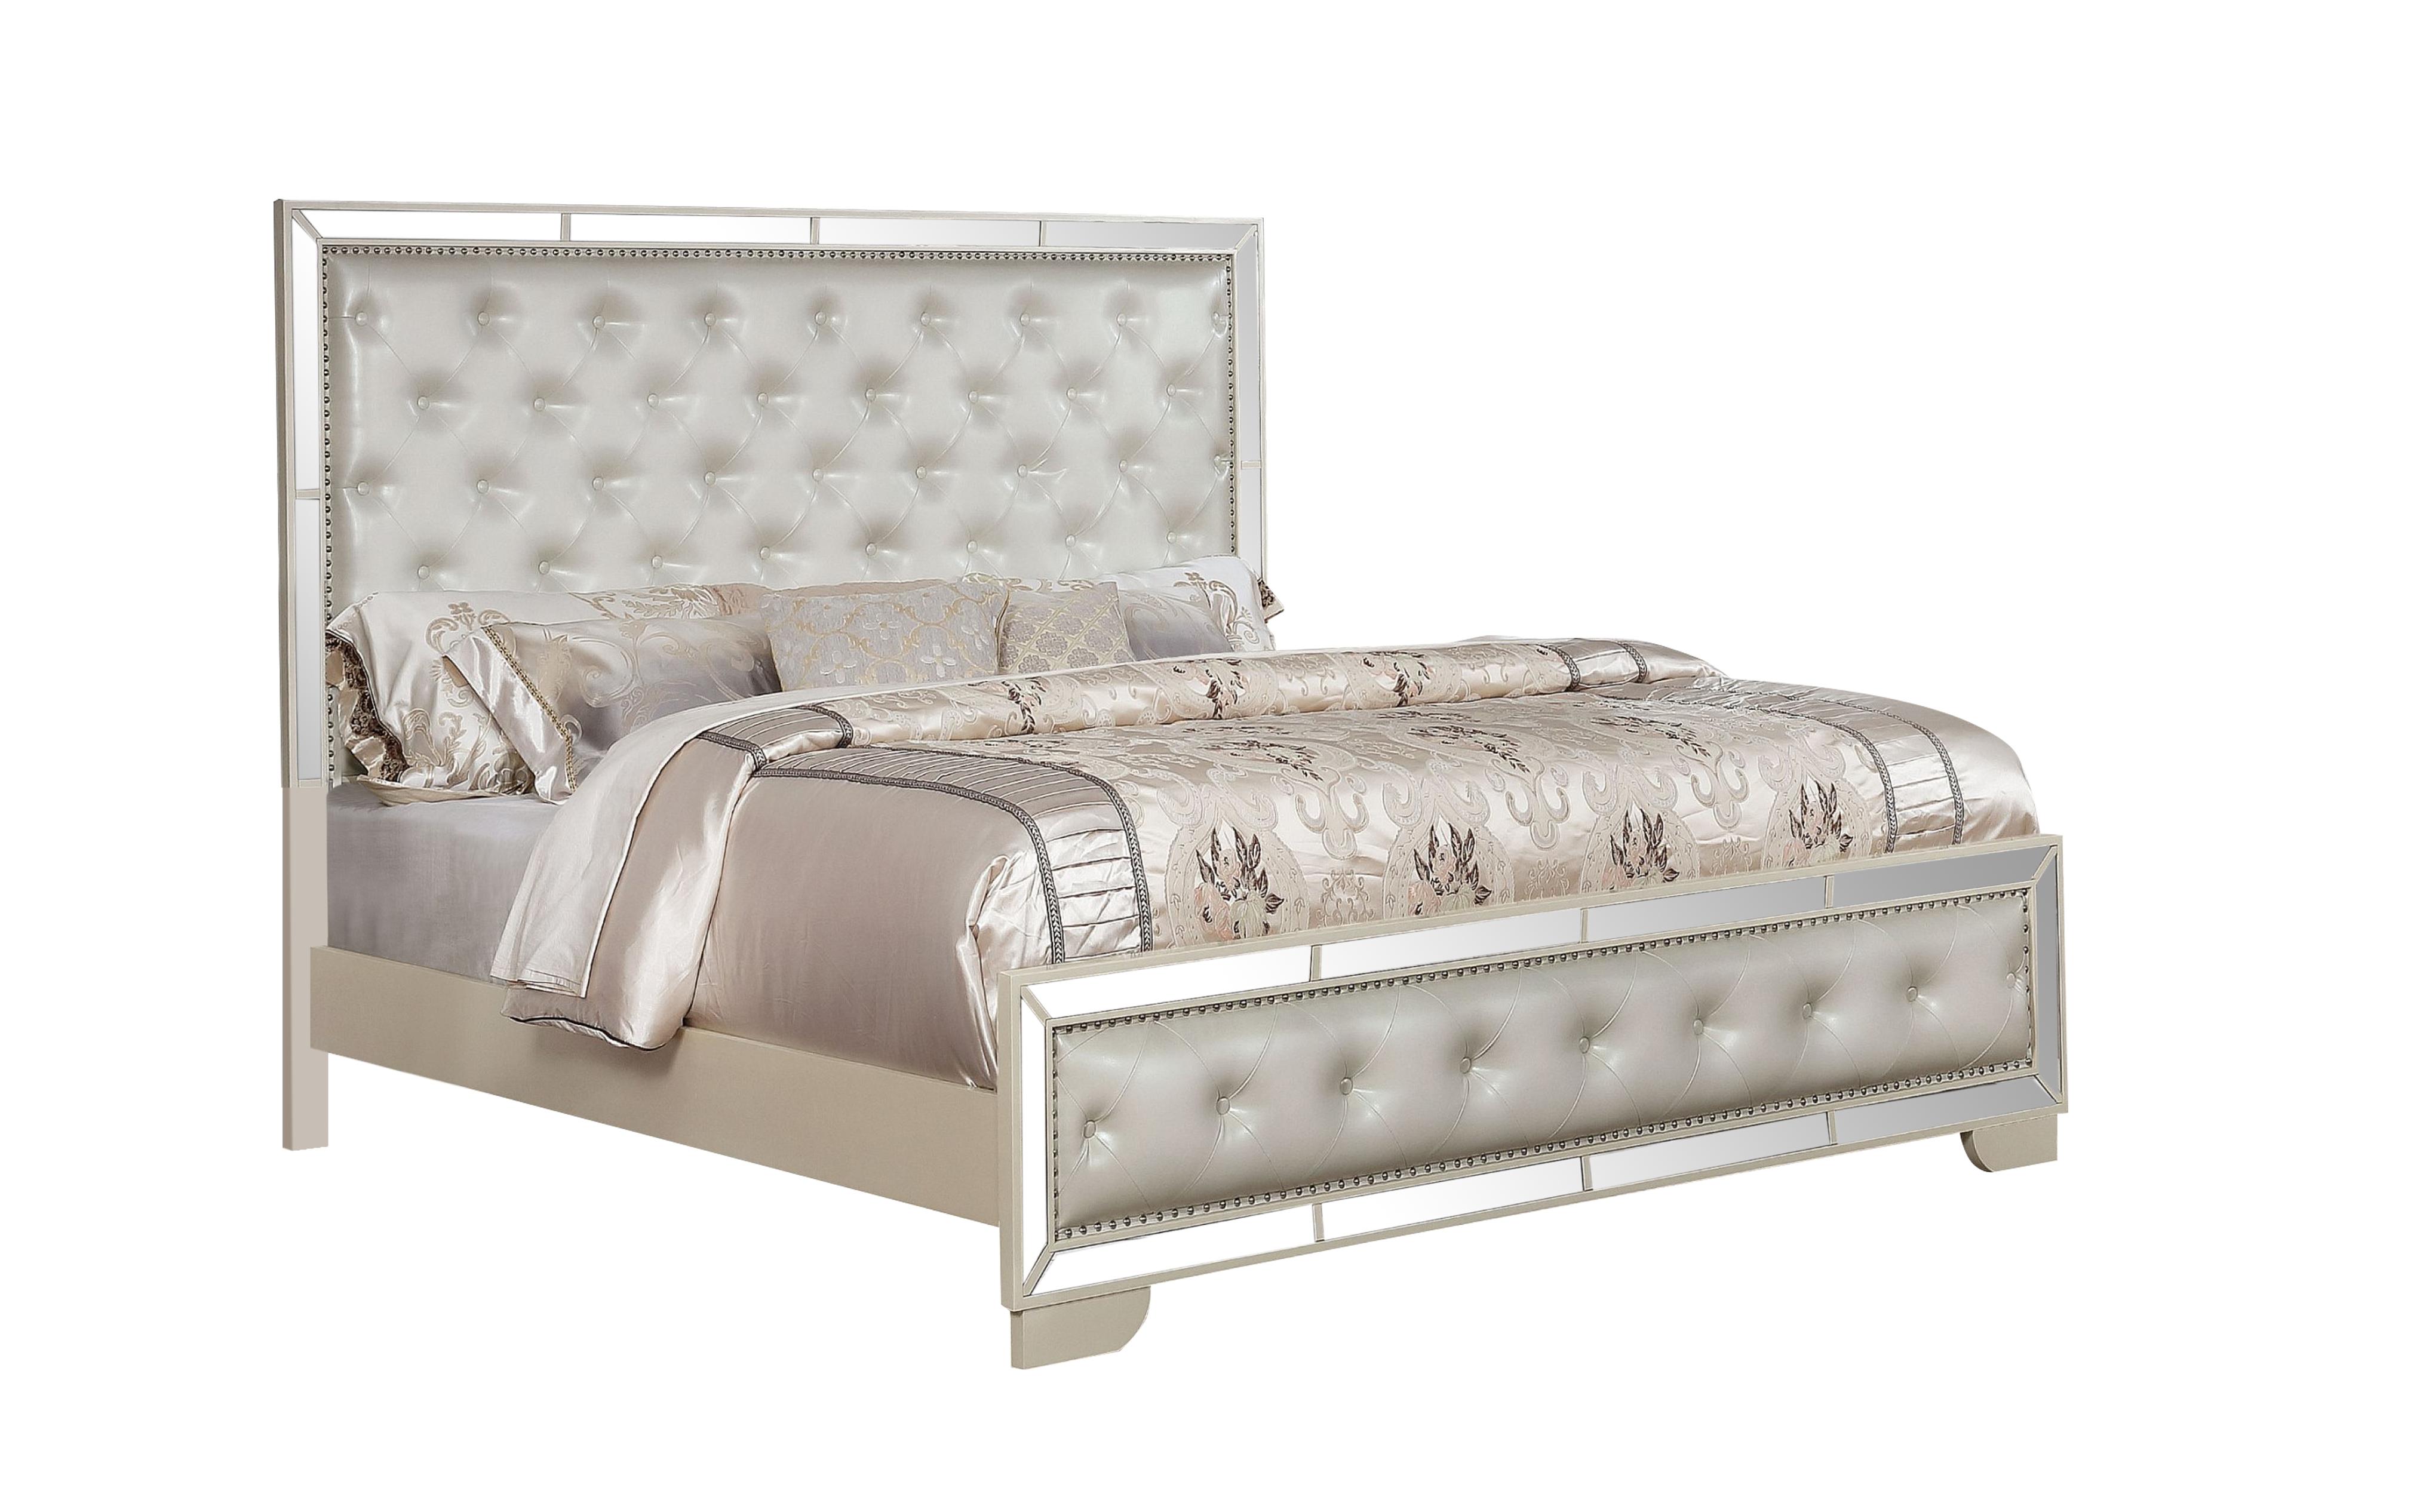 

    
Glam Beige Mirrored Inlay Tufted Queen Bedroom Set 5P MADISON Galaxy Home Modern
